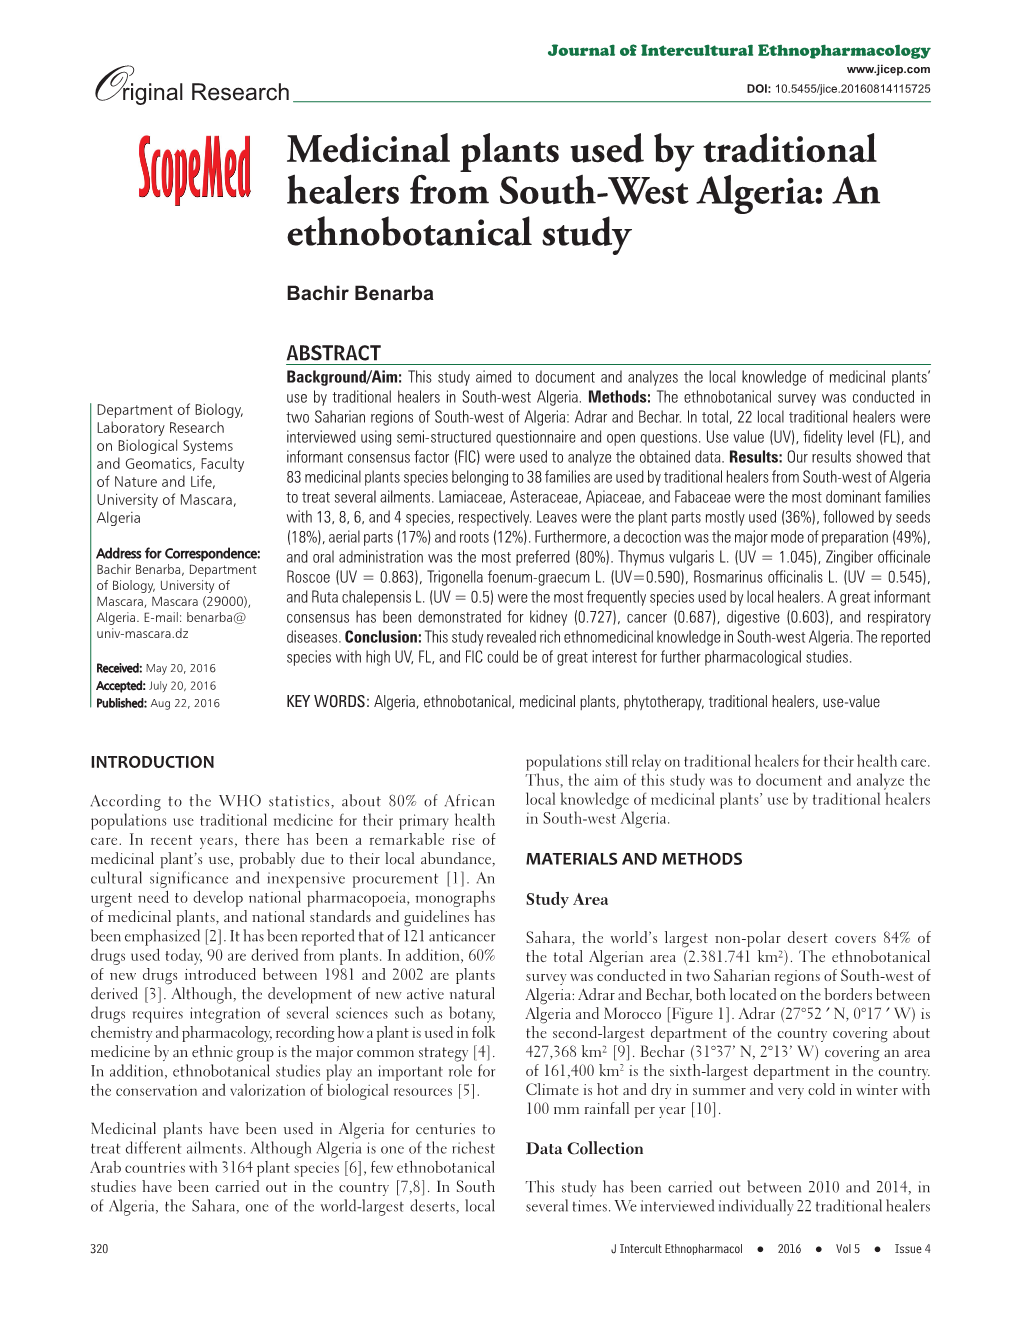 Medicinal Plants Used by Traditional Healers from South-West Algeria: an Ethnobotanical Study